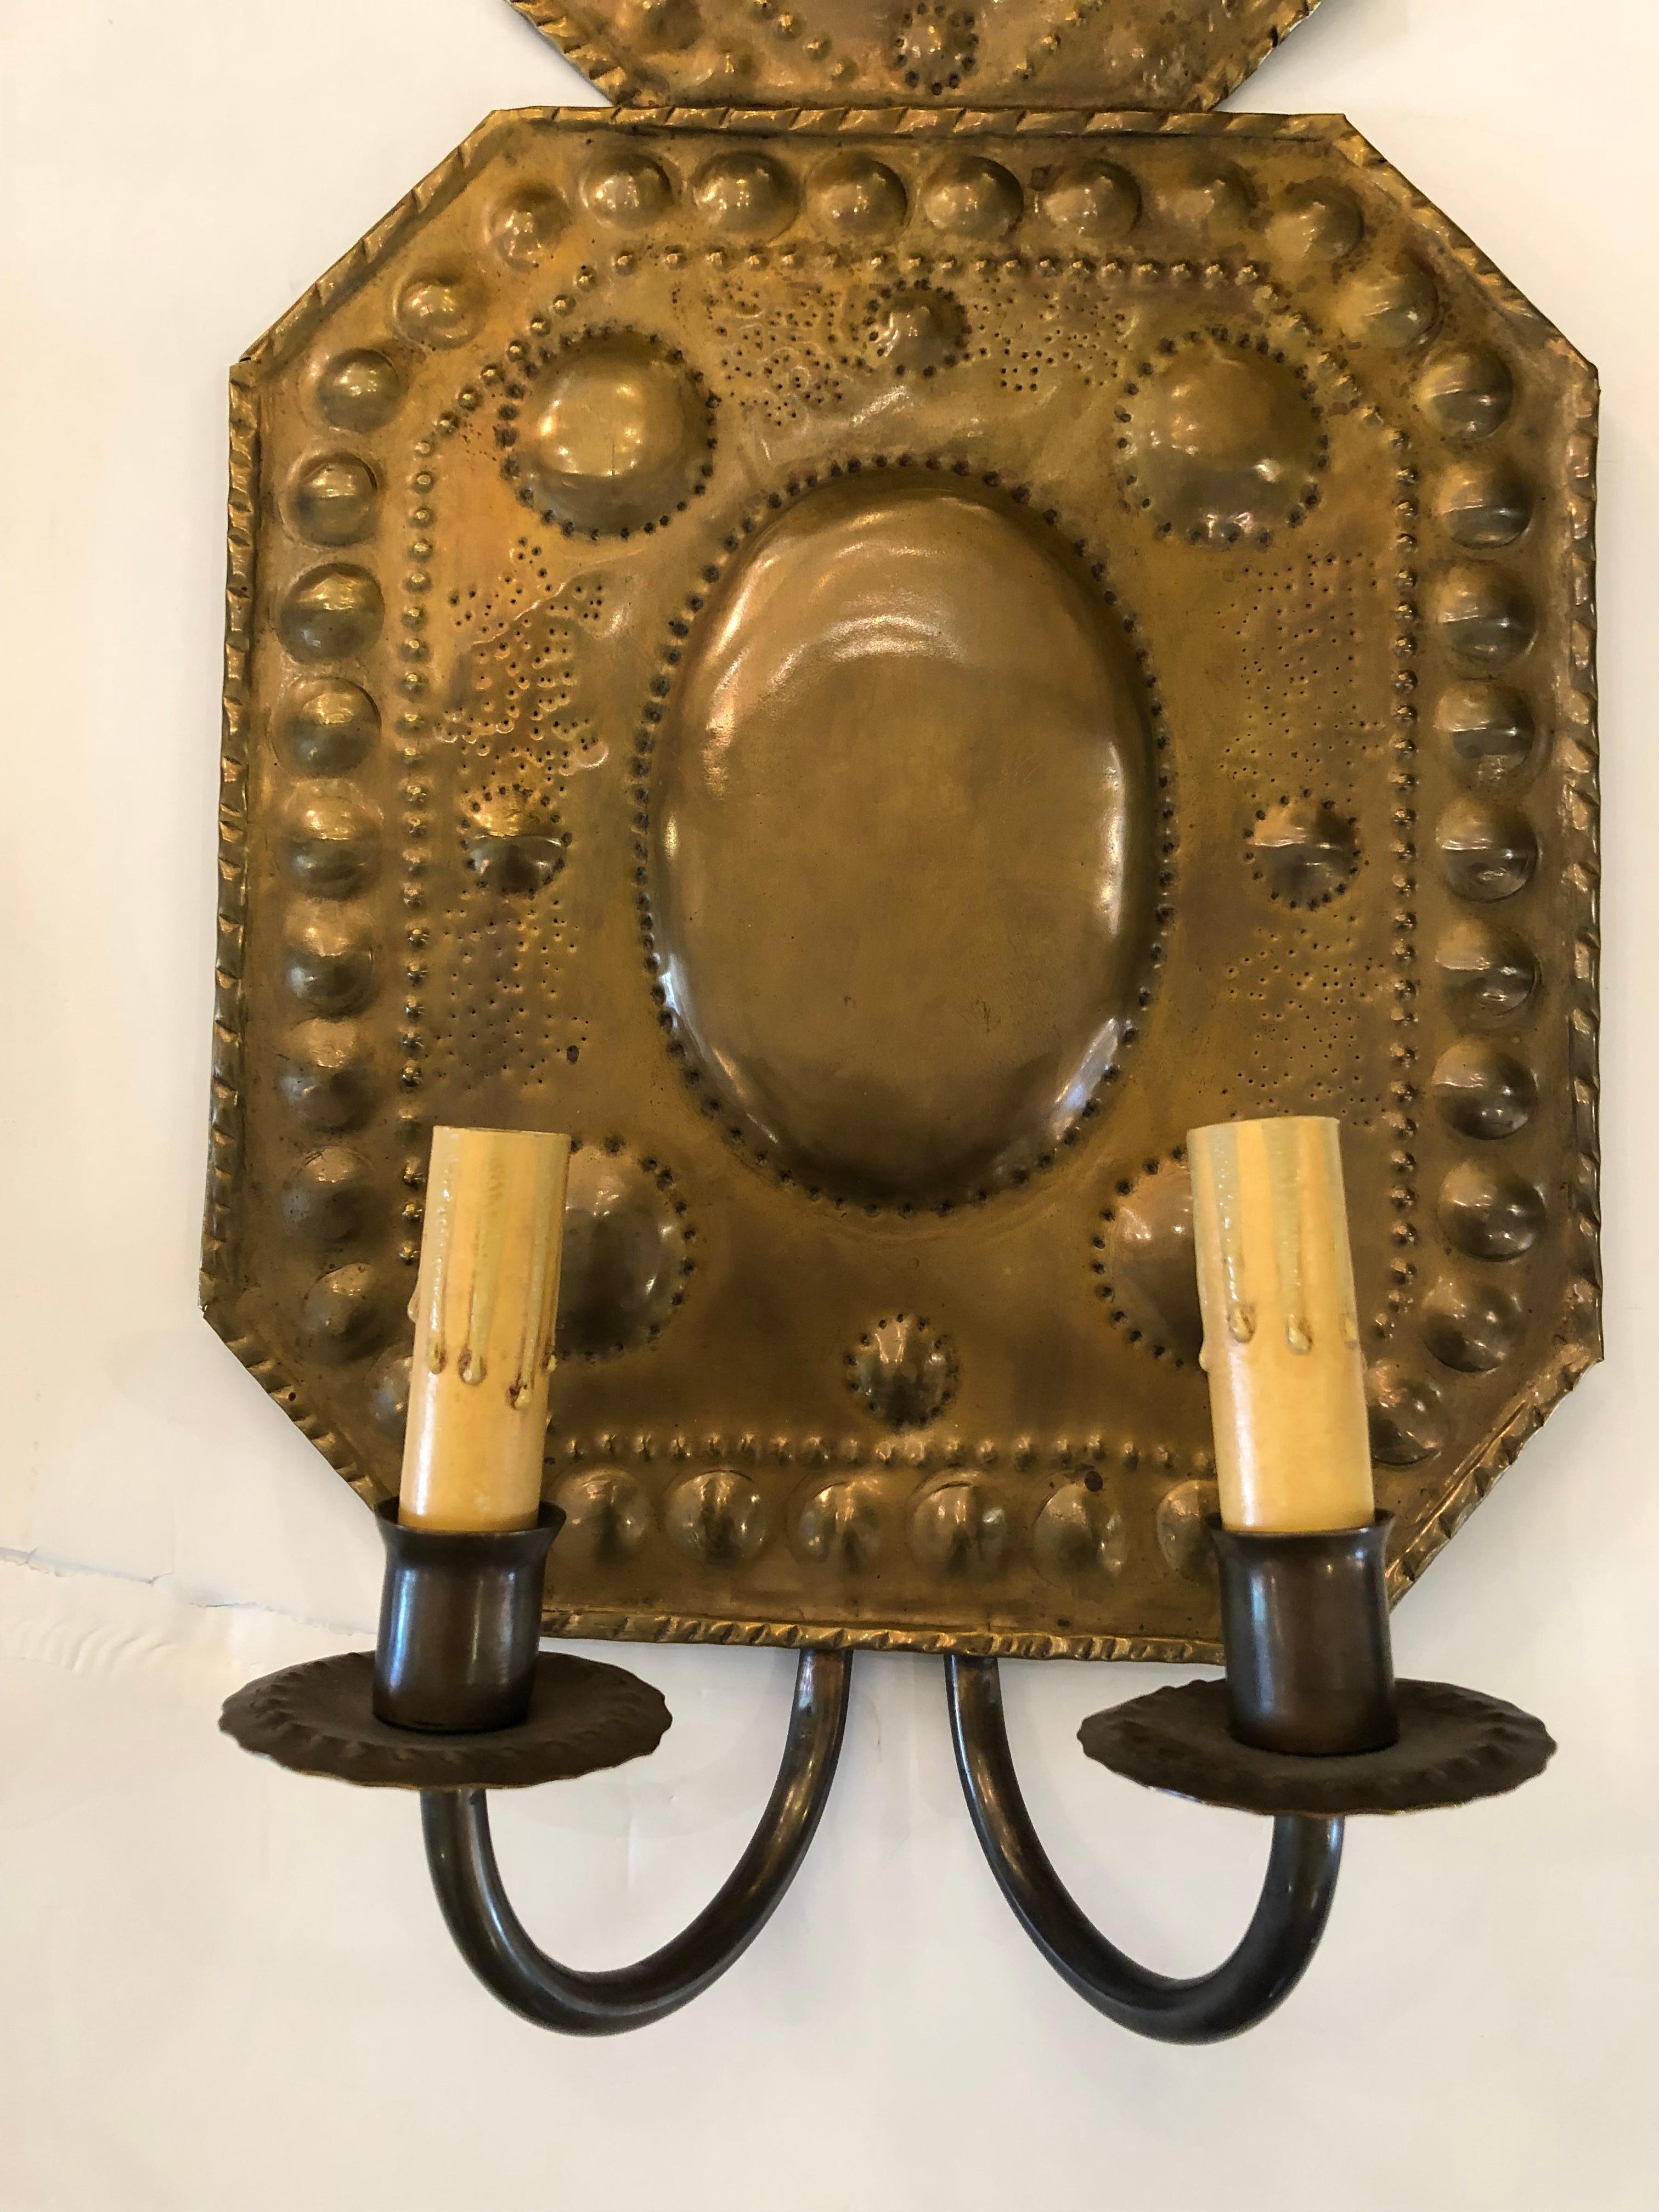 Charming pair of hammered brass 19th century wall sconces having a folk art feel with hearts at the top and octagonal sections with circles and oval decoration. Fully electrified with two arms per sconce.